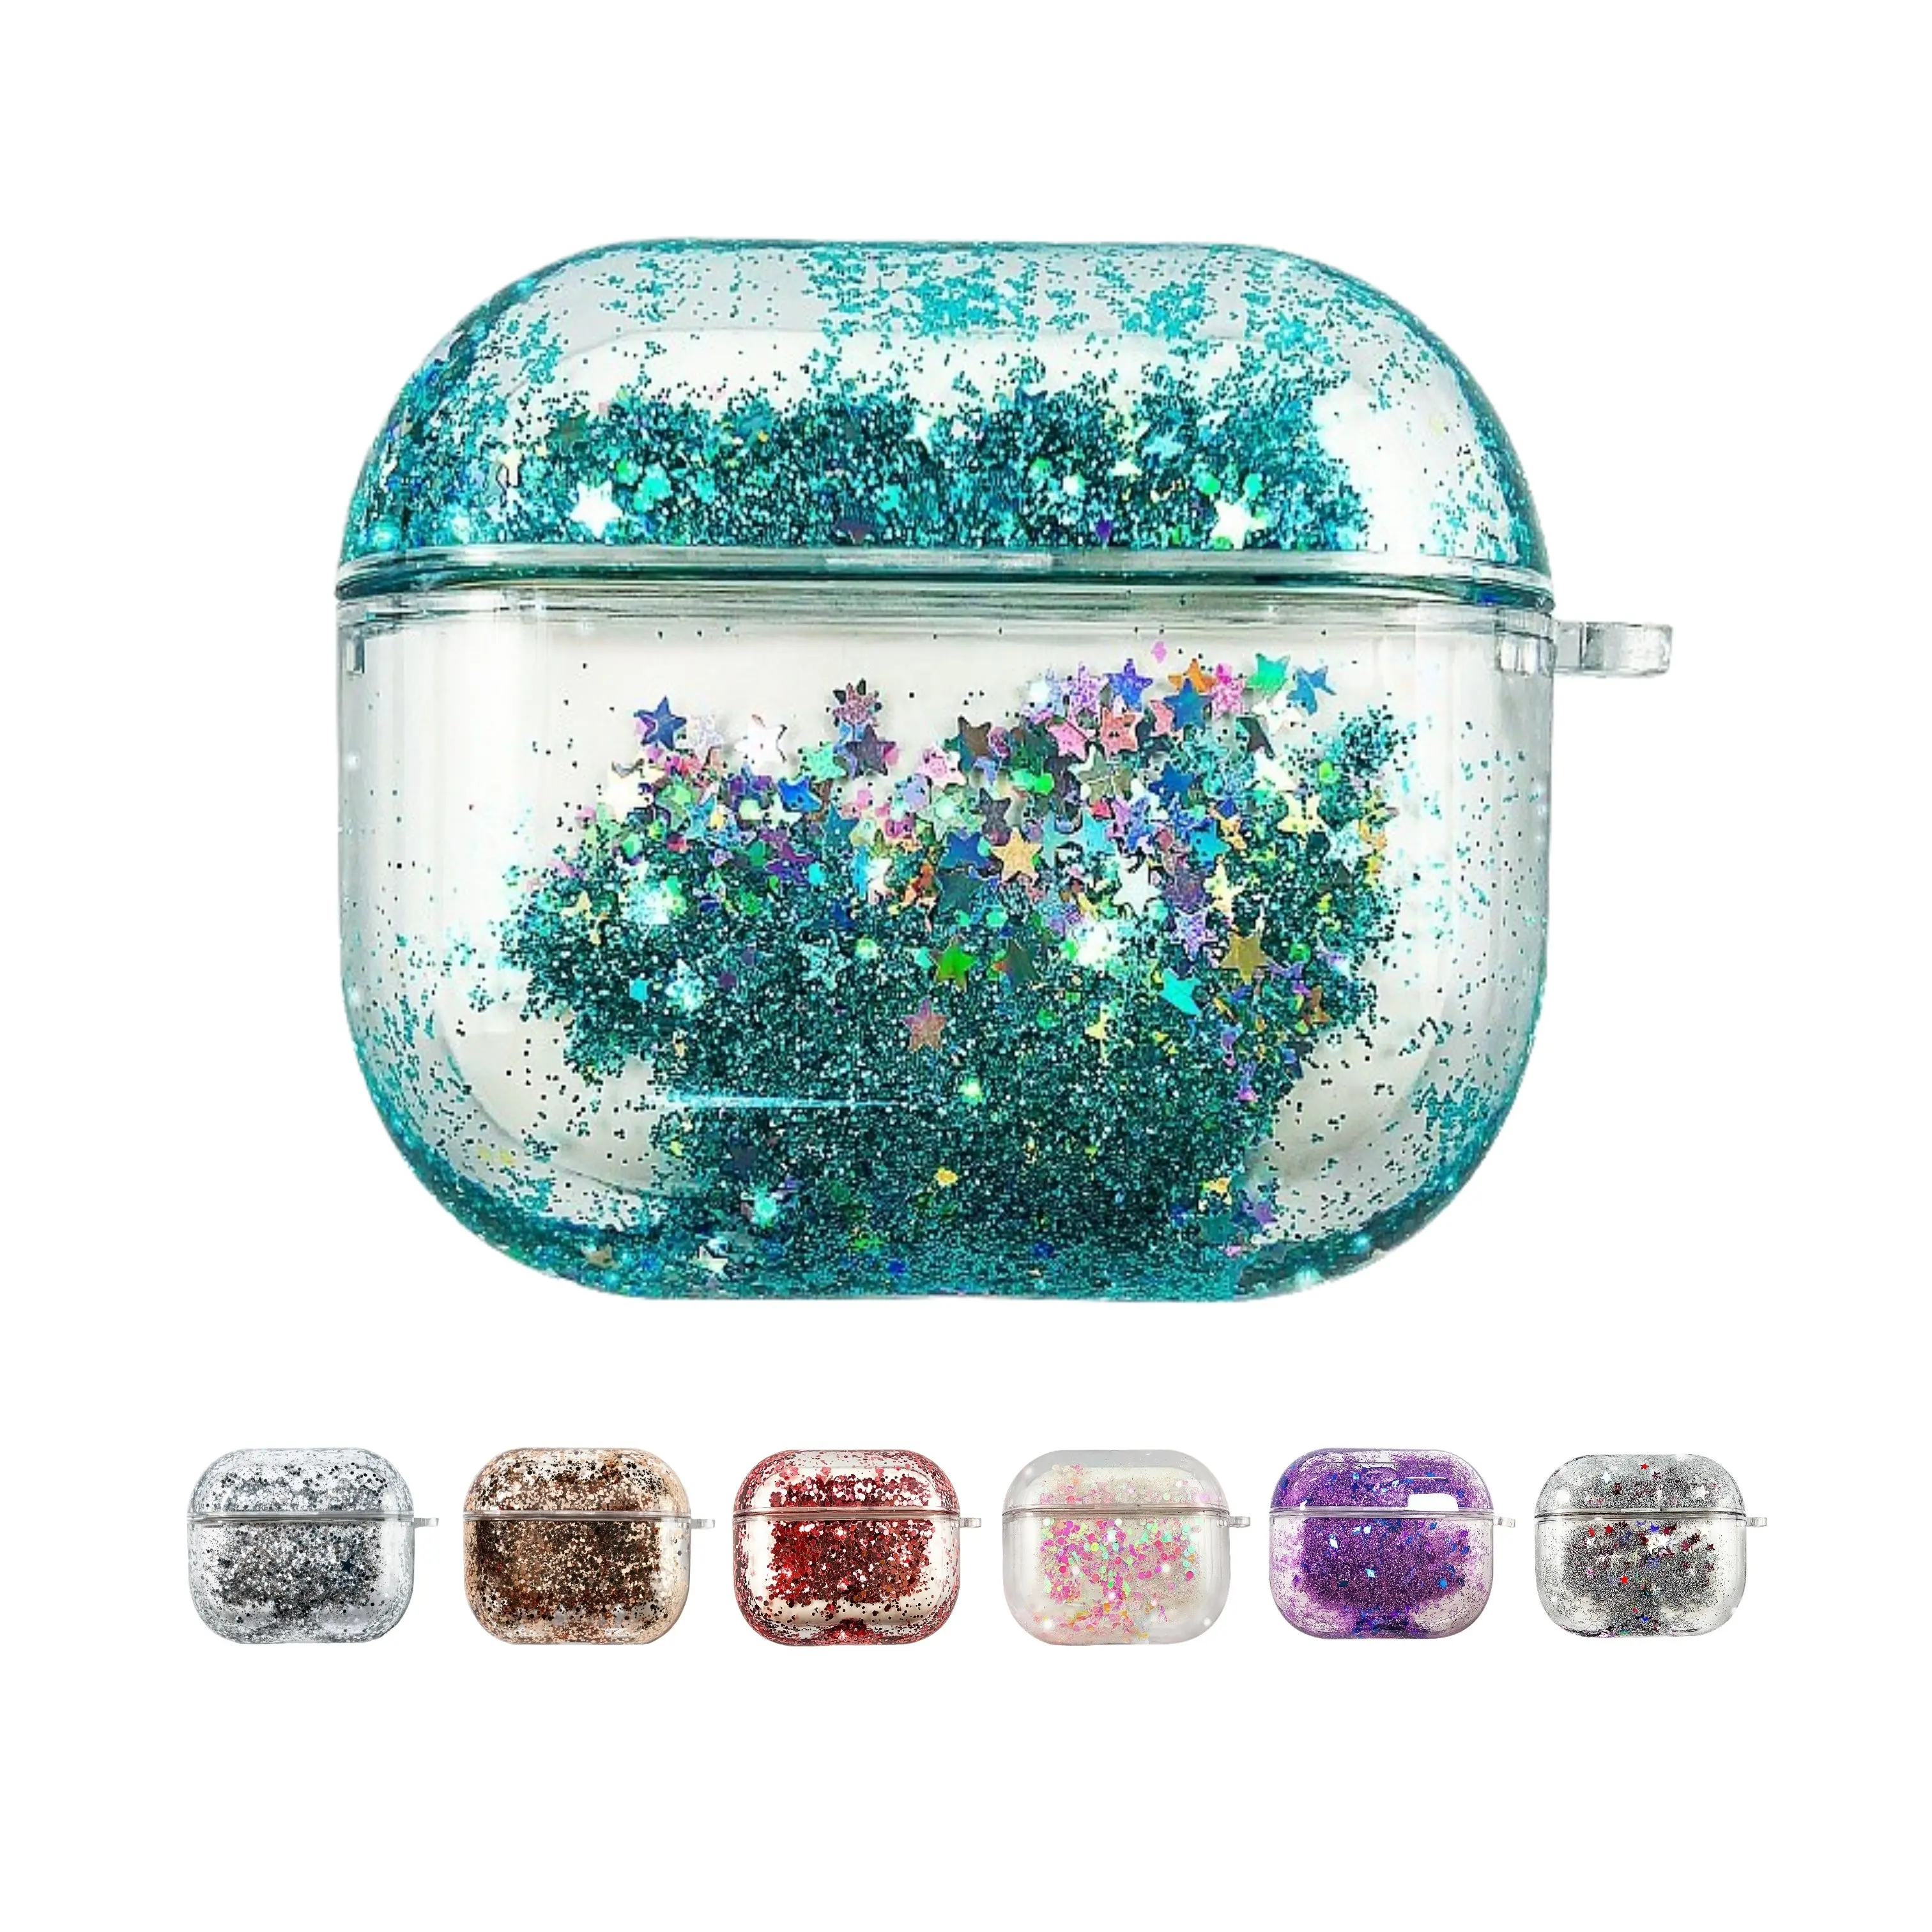 Liquid Sand airpods case for Apple earphone PC case airpod pro with Glitter sand bling air pods 3 case